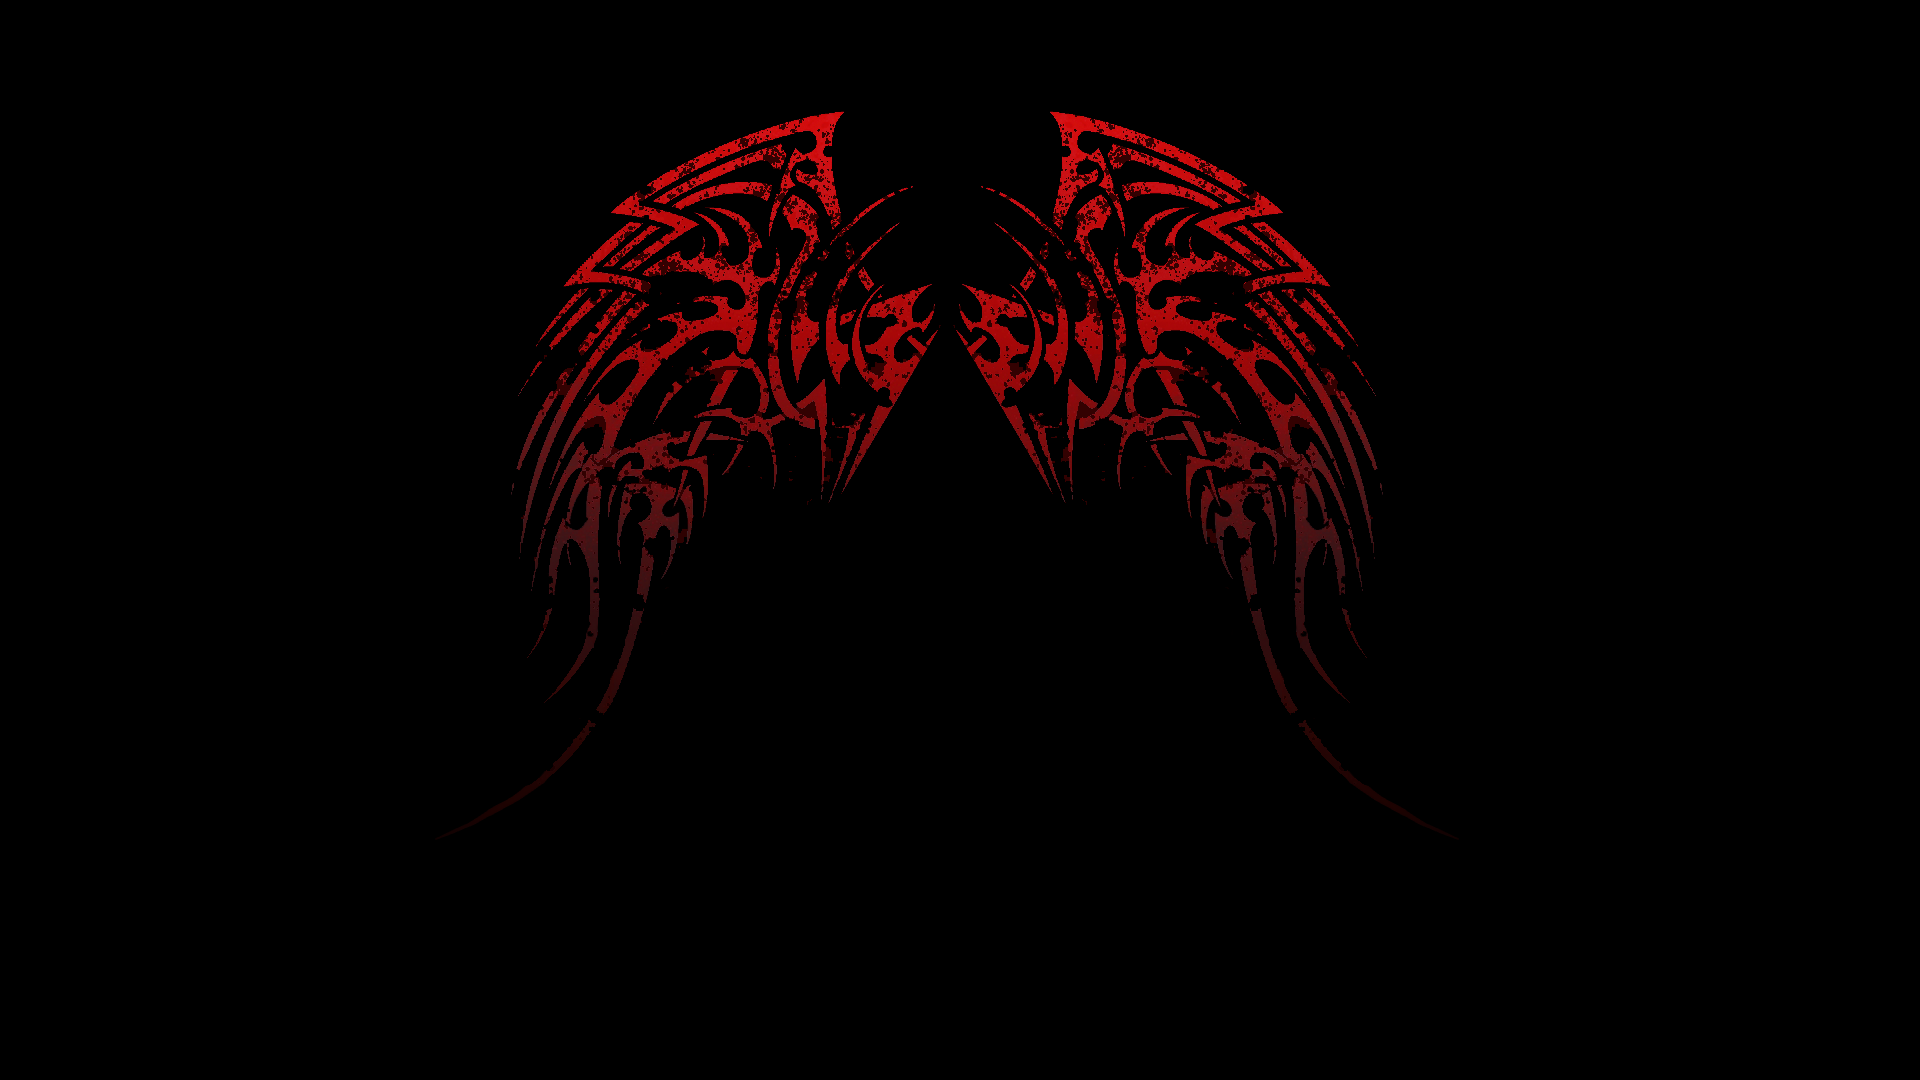 wings wallpaper hd,black,red,darkness,room,graphic design